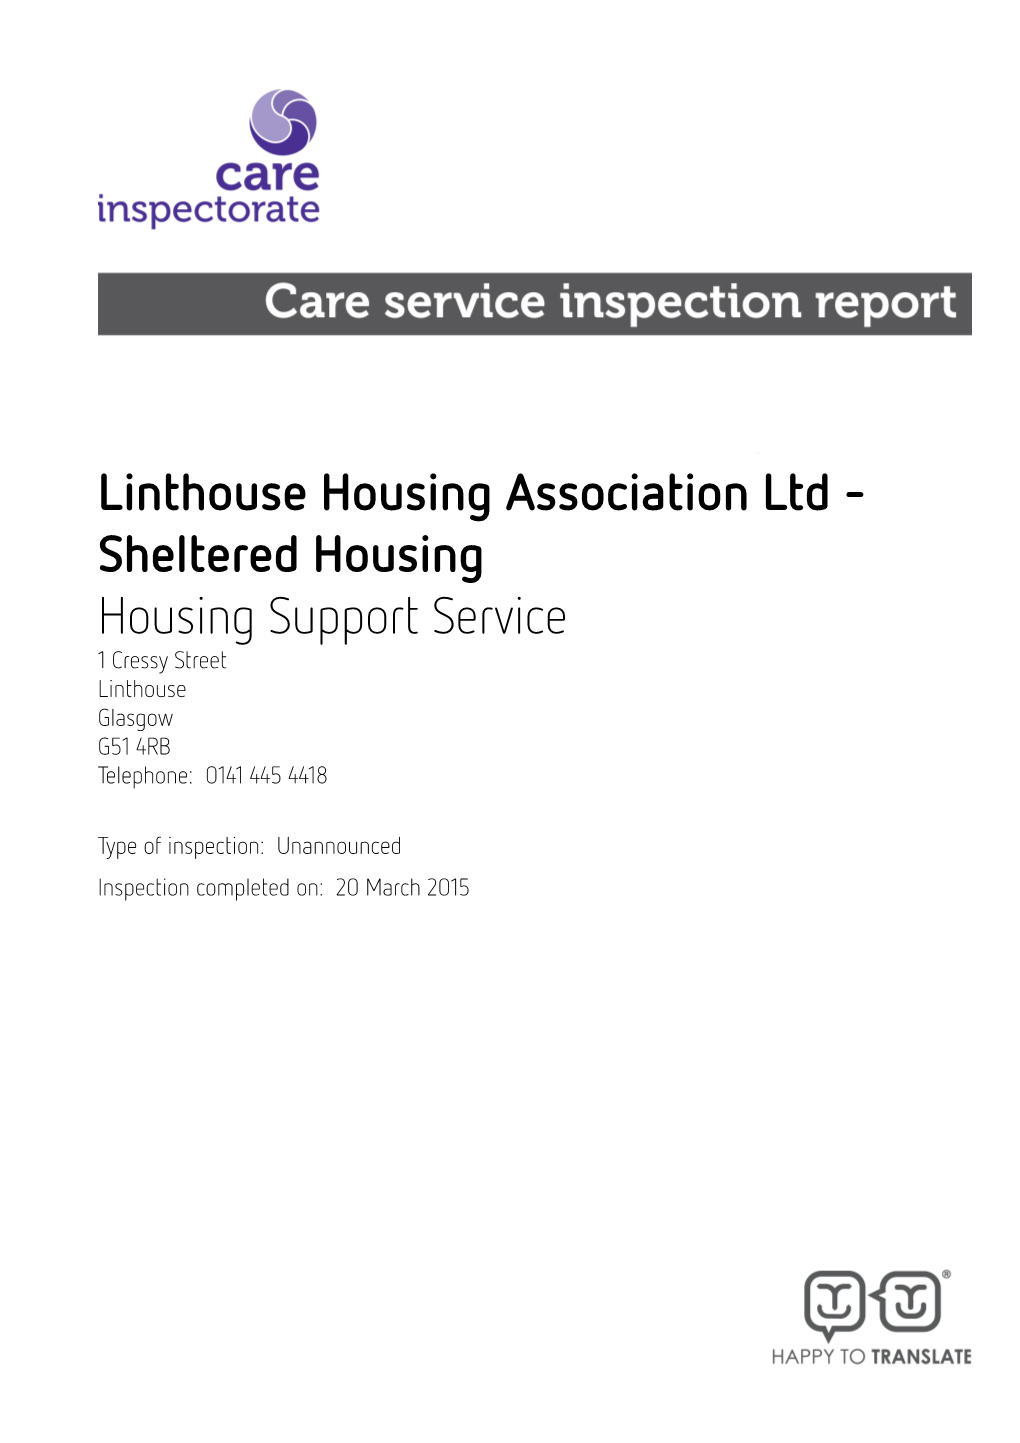 Linthouse Housing Association Ltd - Sheltered Housing Housing Support Service 1 Cressy Street Linthouse Glasgow G51 4RB Telephone: 0141 445 4418